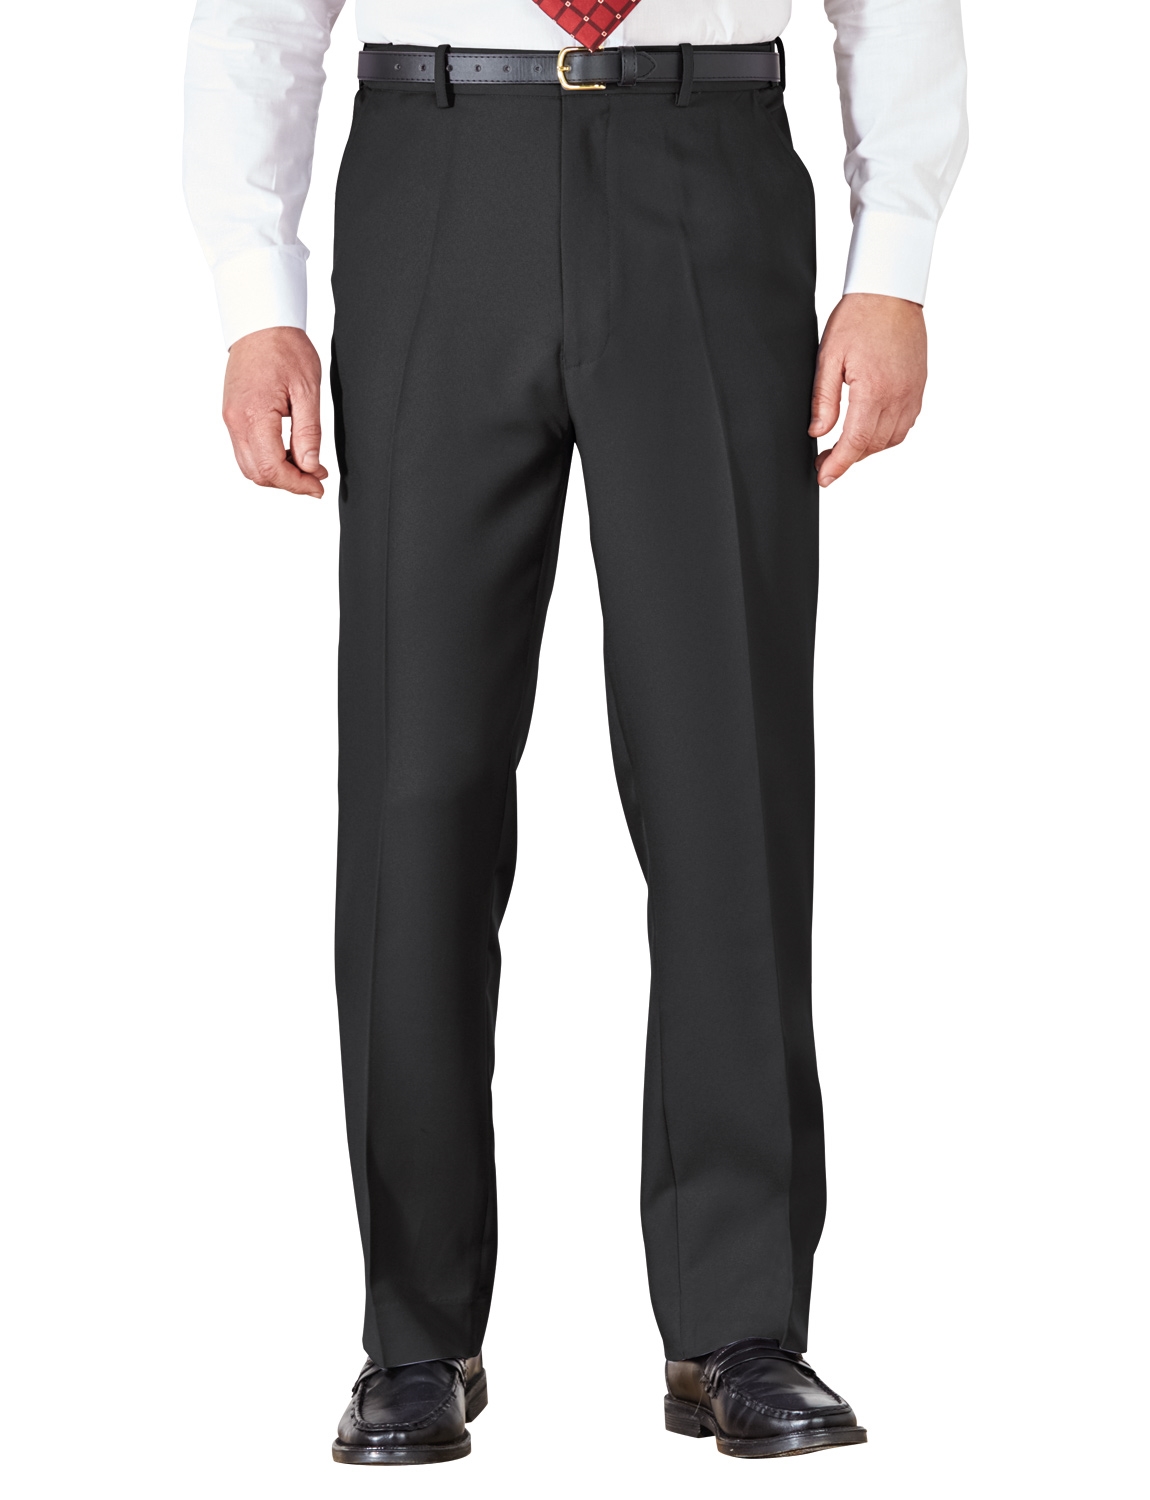 Mens HIGH-RISE Twill Trouser With Stretch Waist Pants Chums | eBay